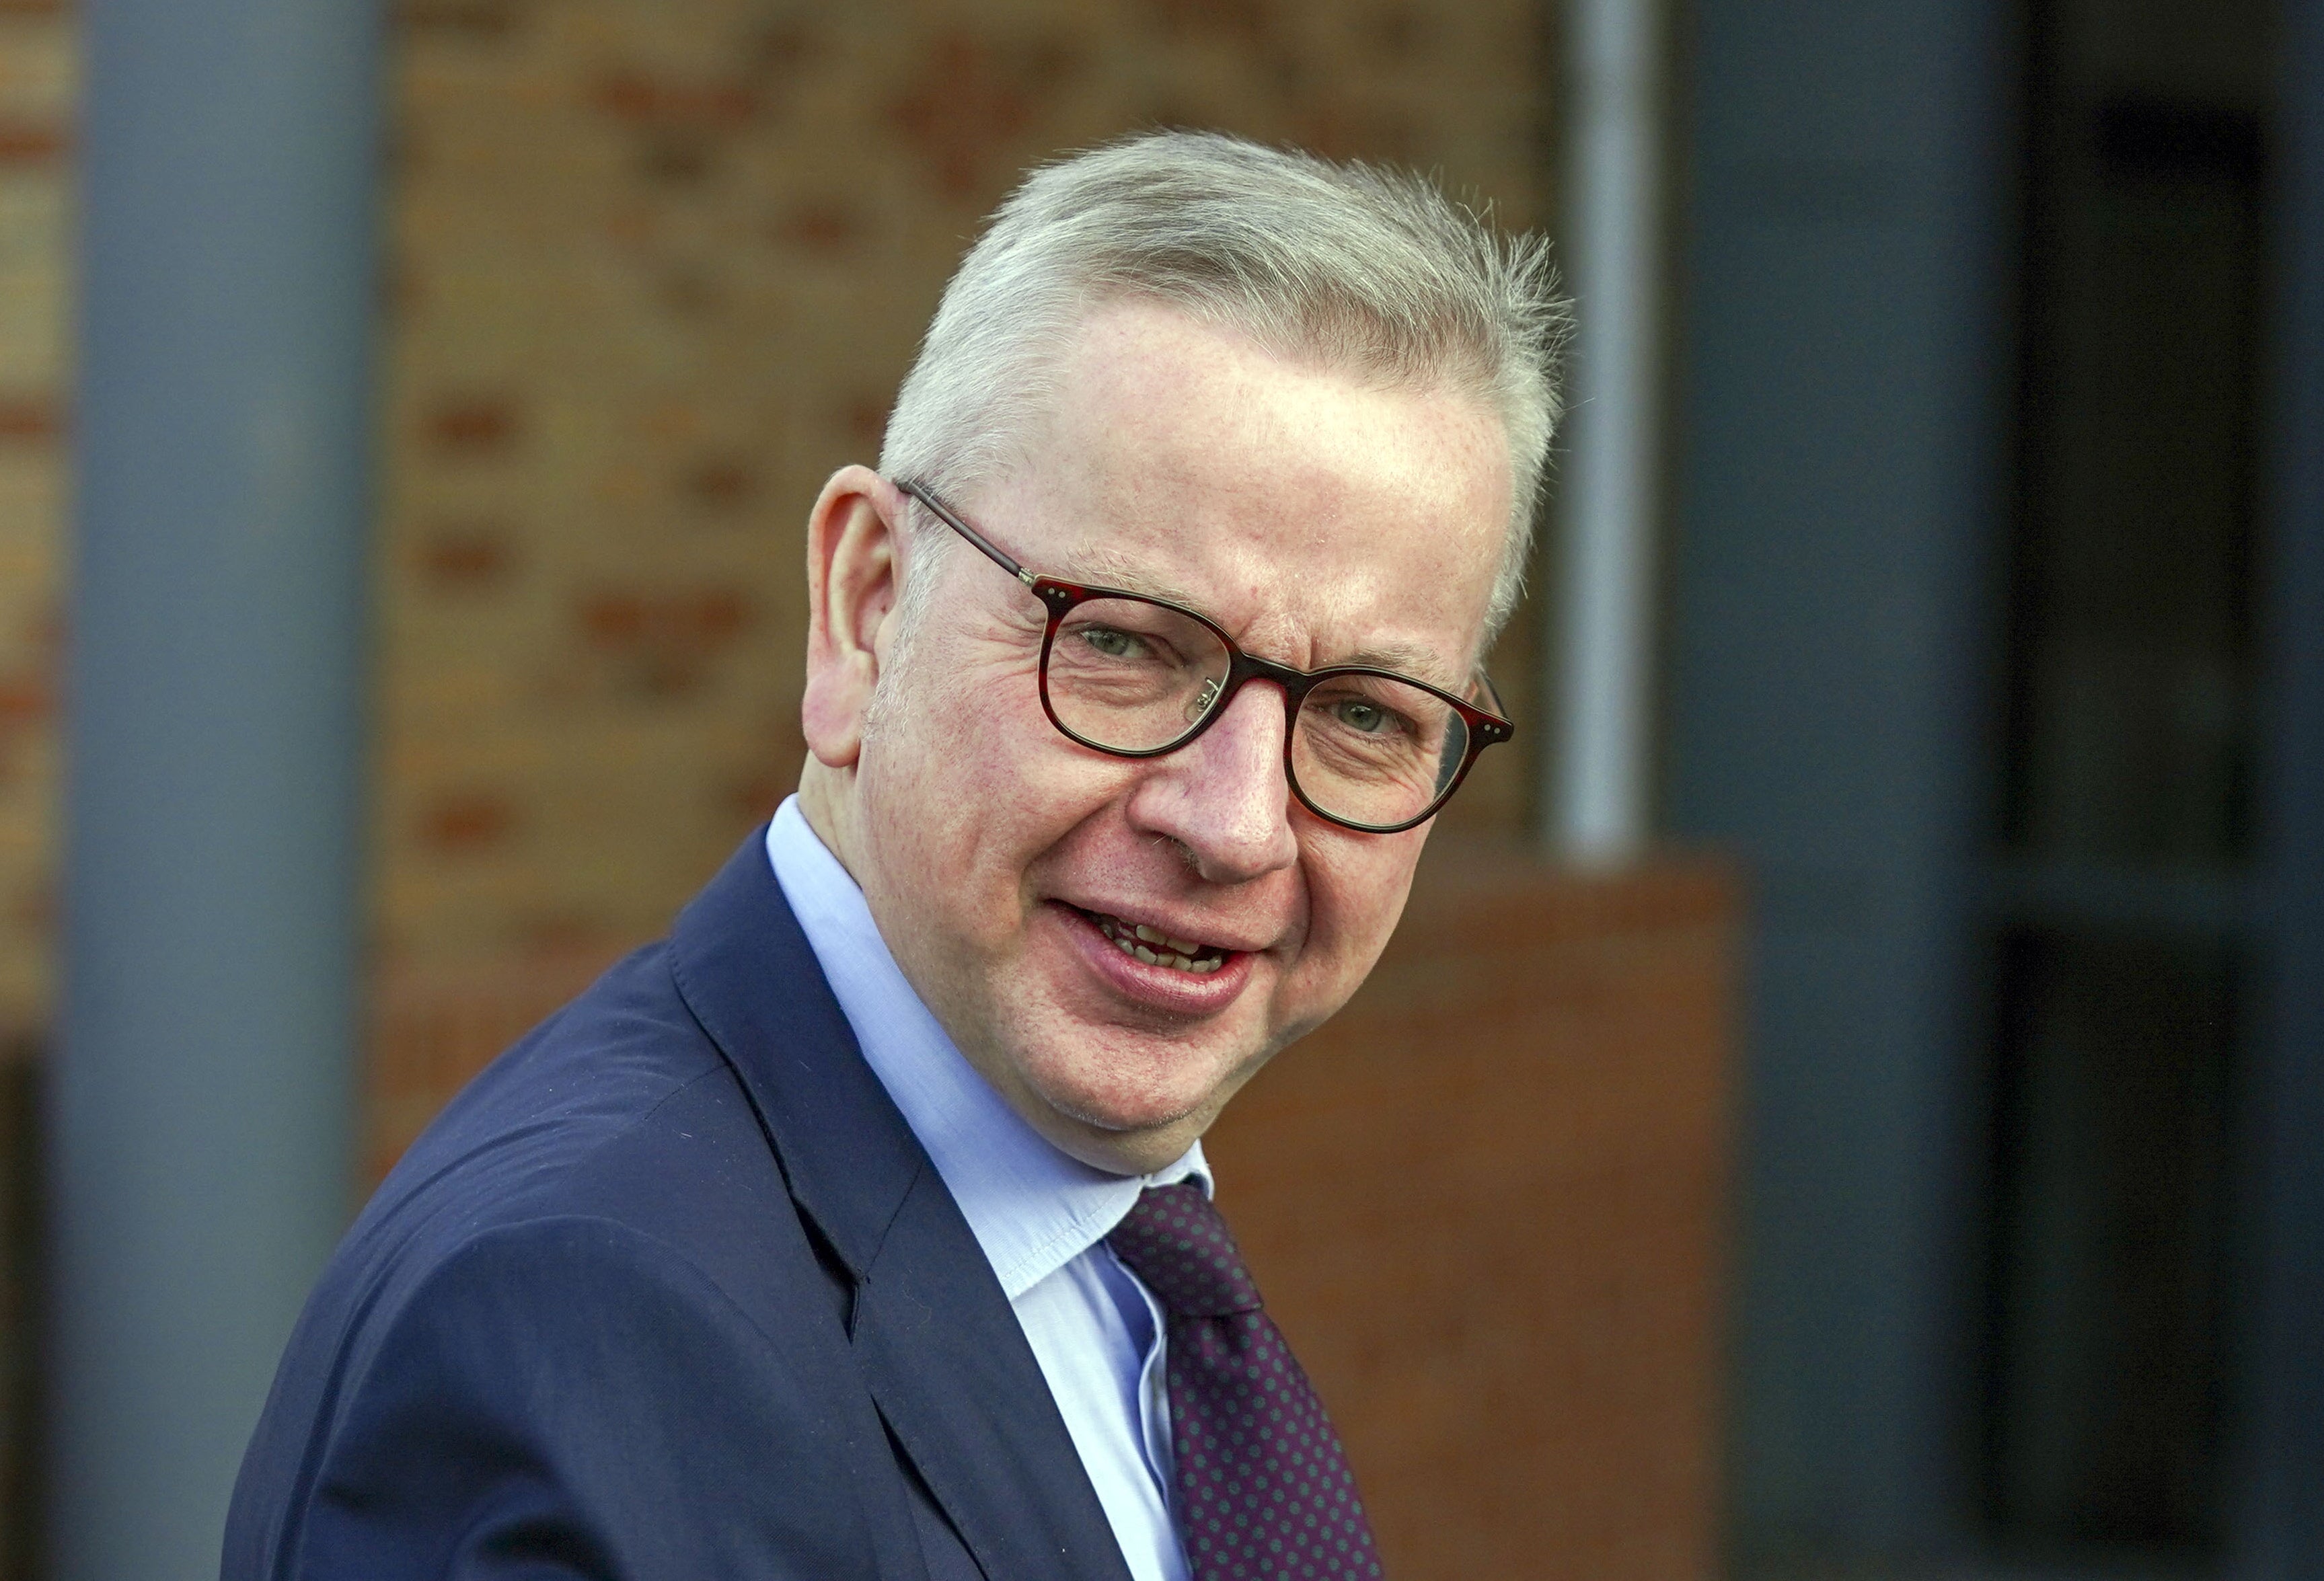 Michael Gove dismissed suggestions that he is among Cabinet members opposed to tearing up the Northern Ireland Protocol (Steve Parsons/PA)